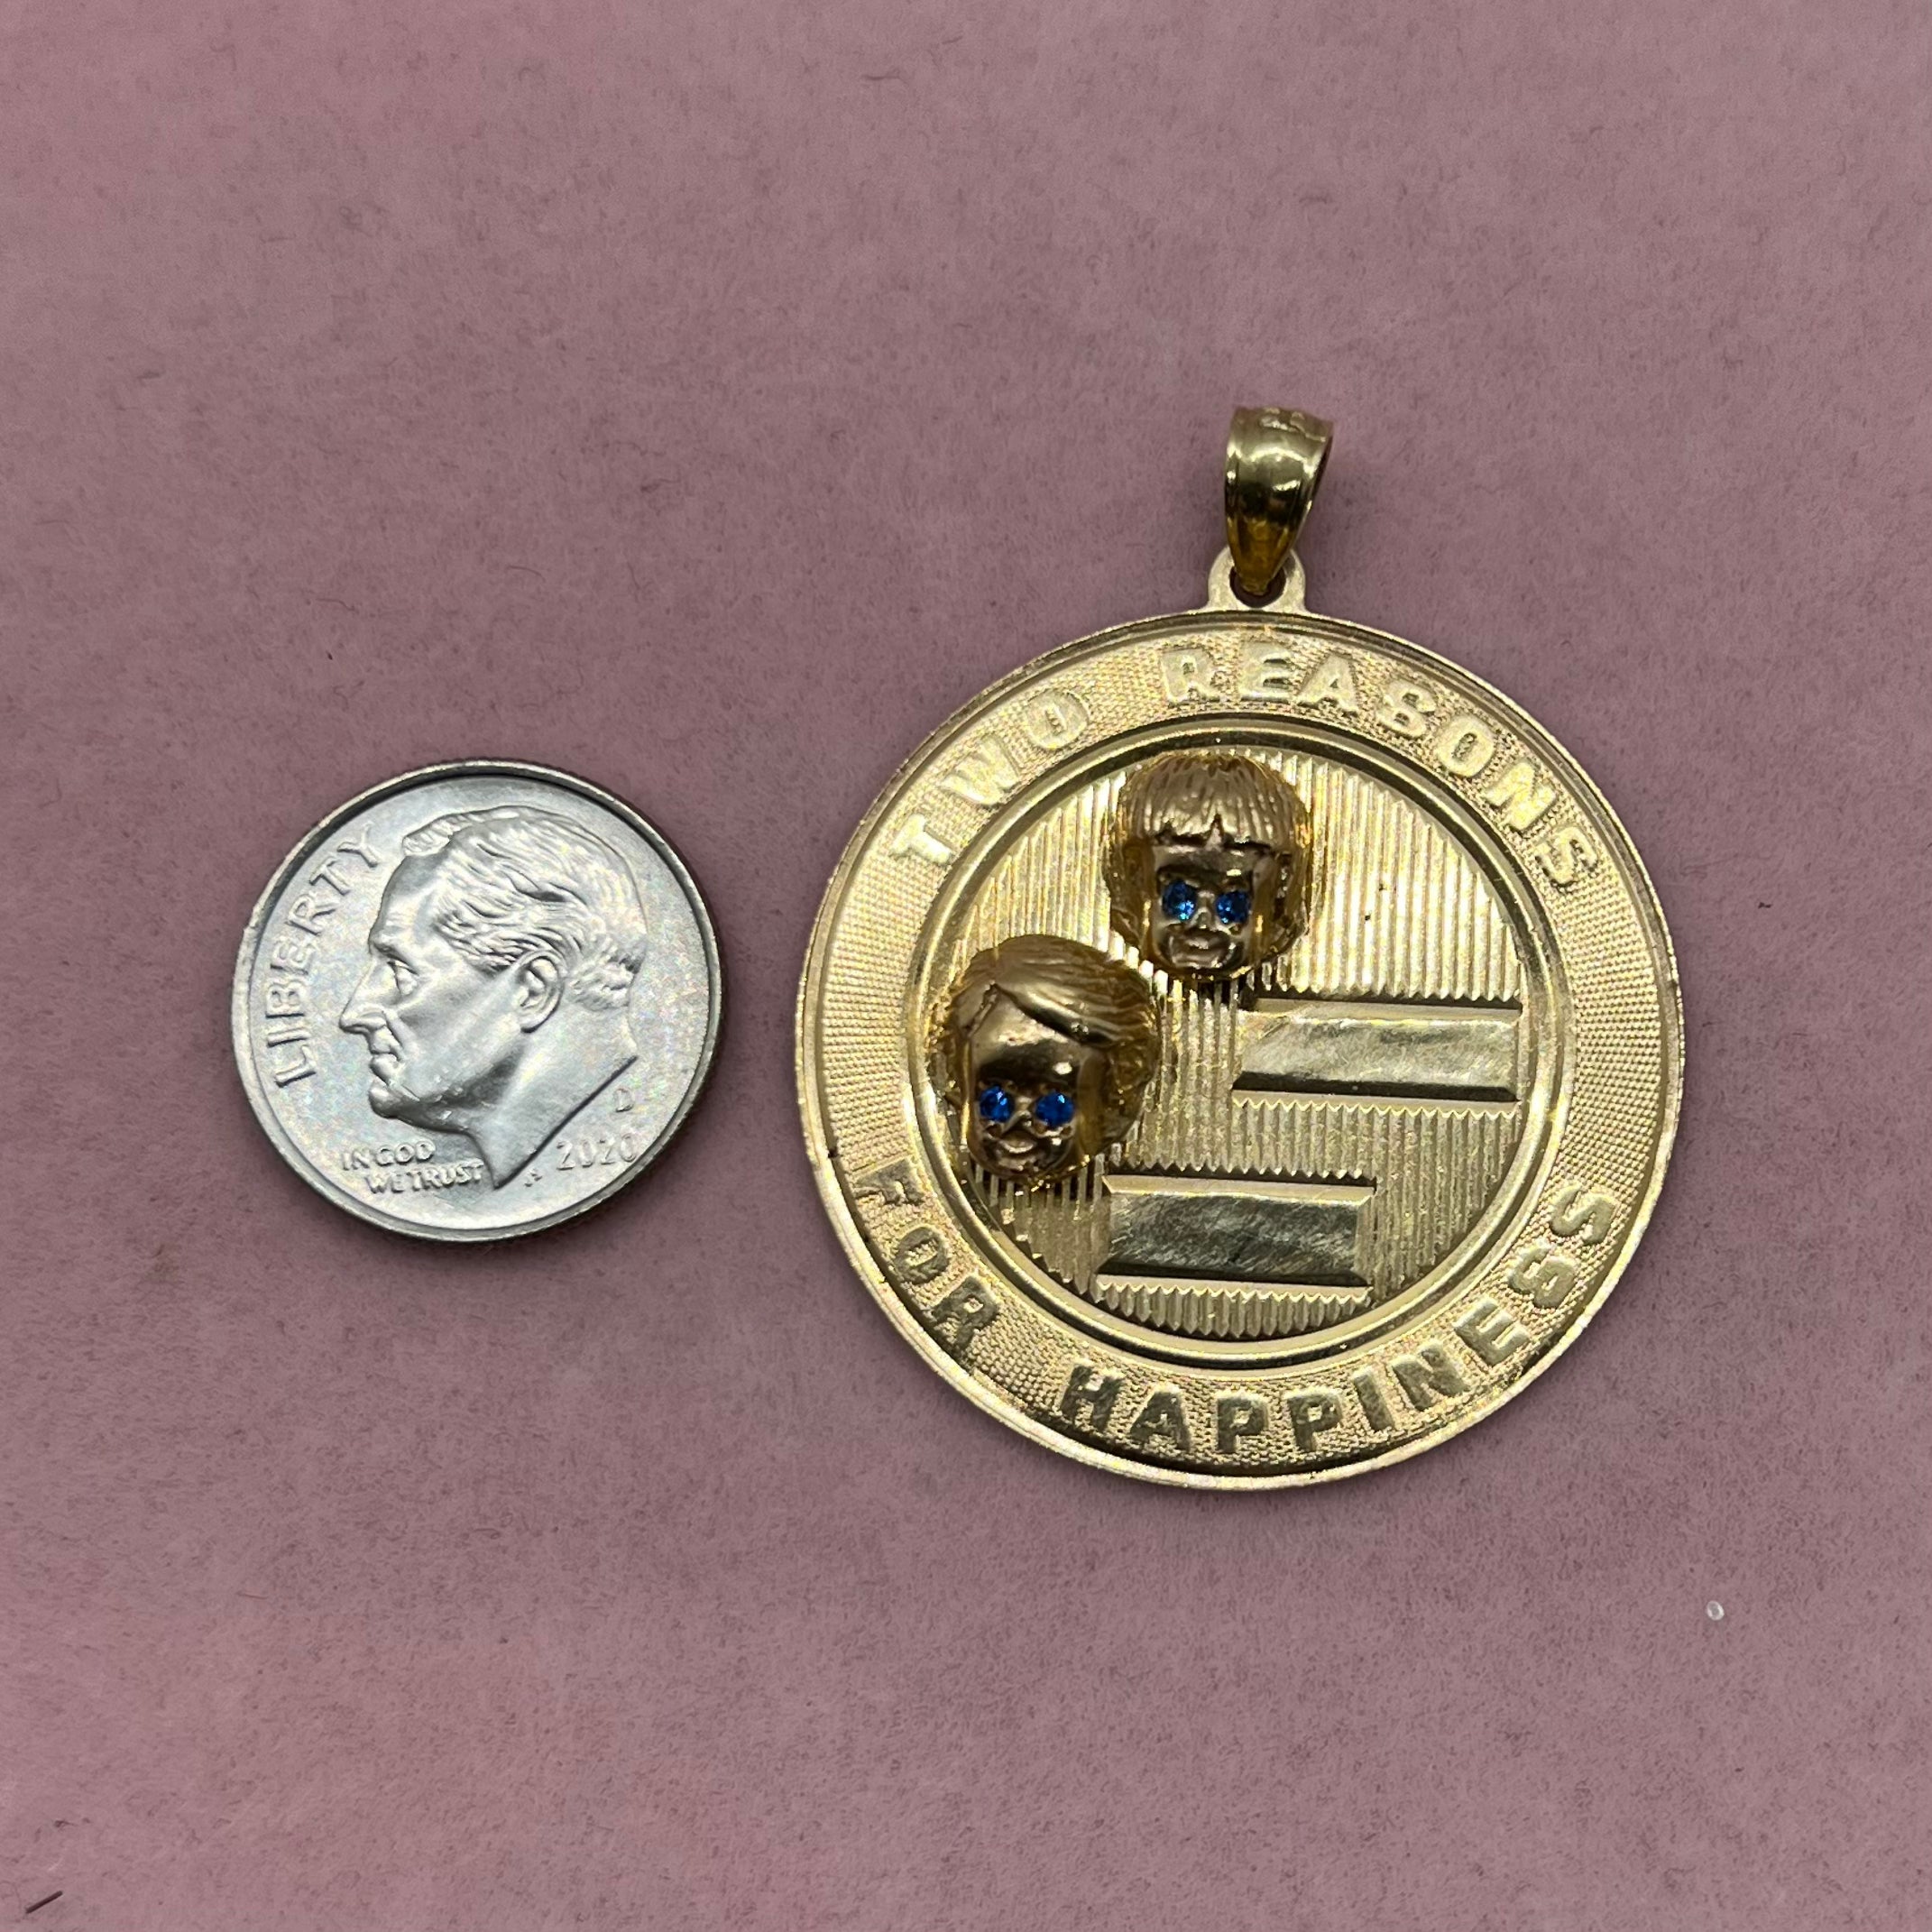 'Two Reasons For Happiness' Children Medallion